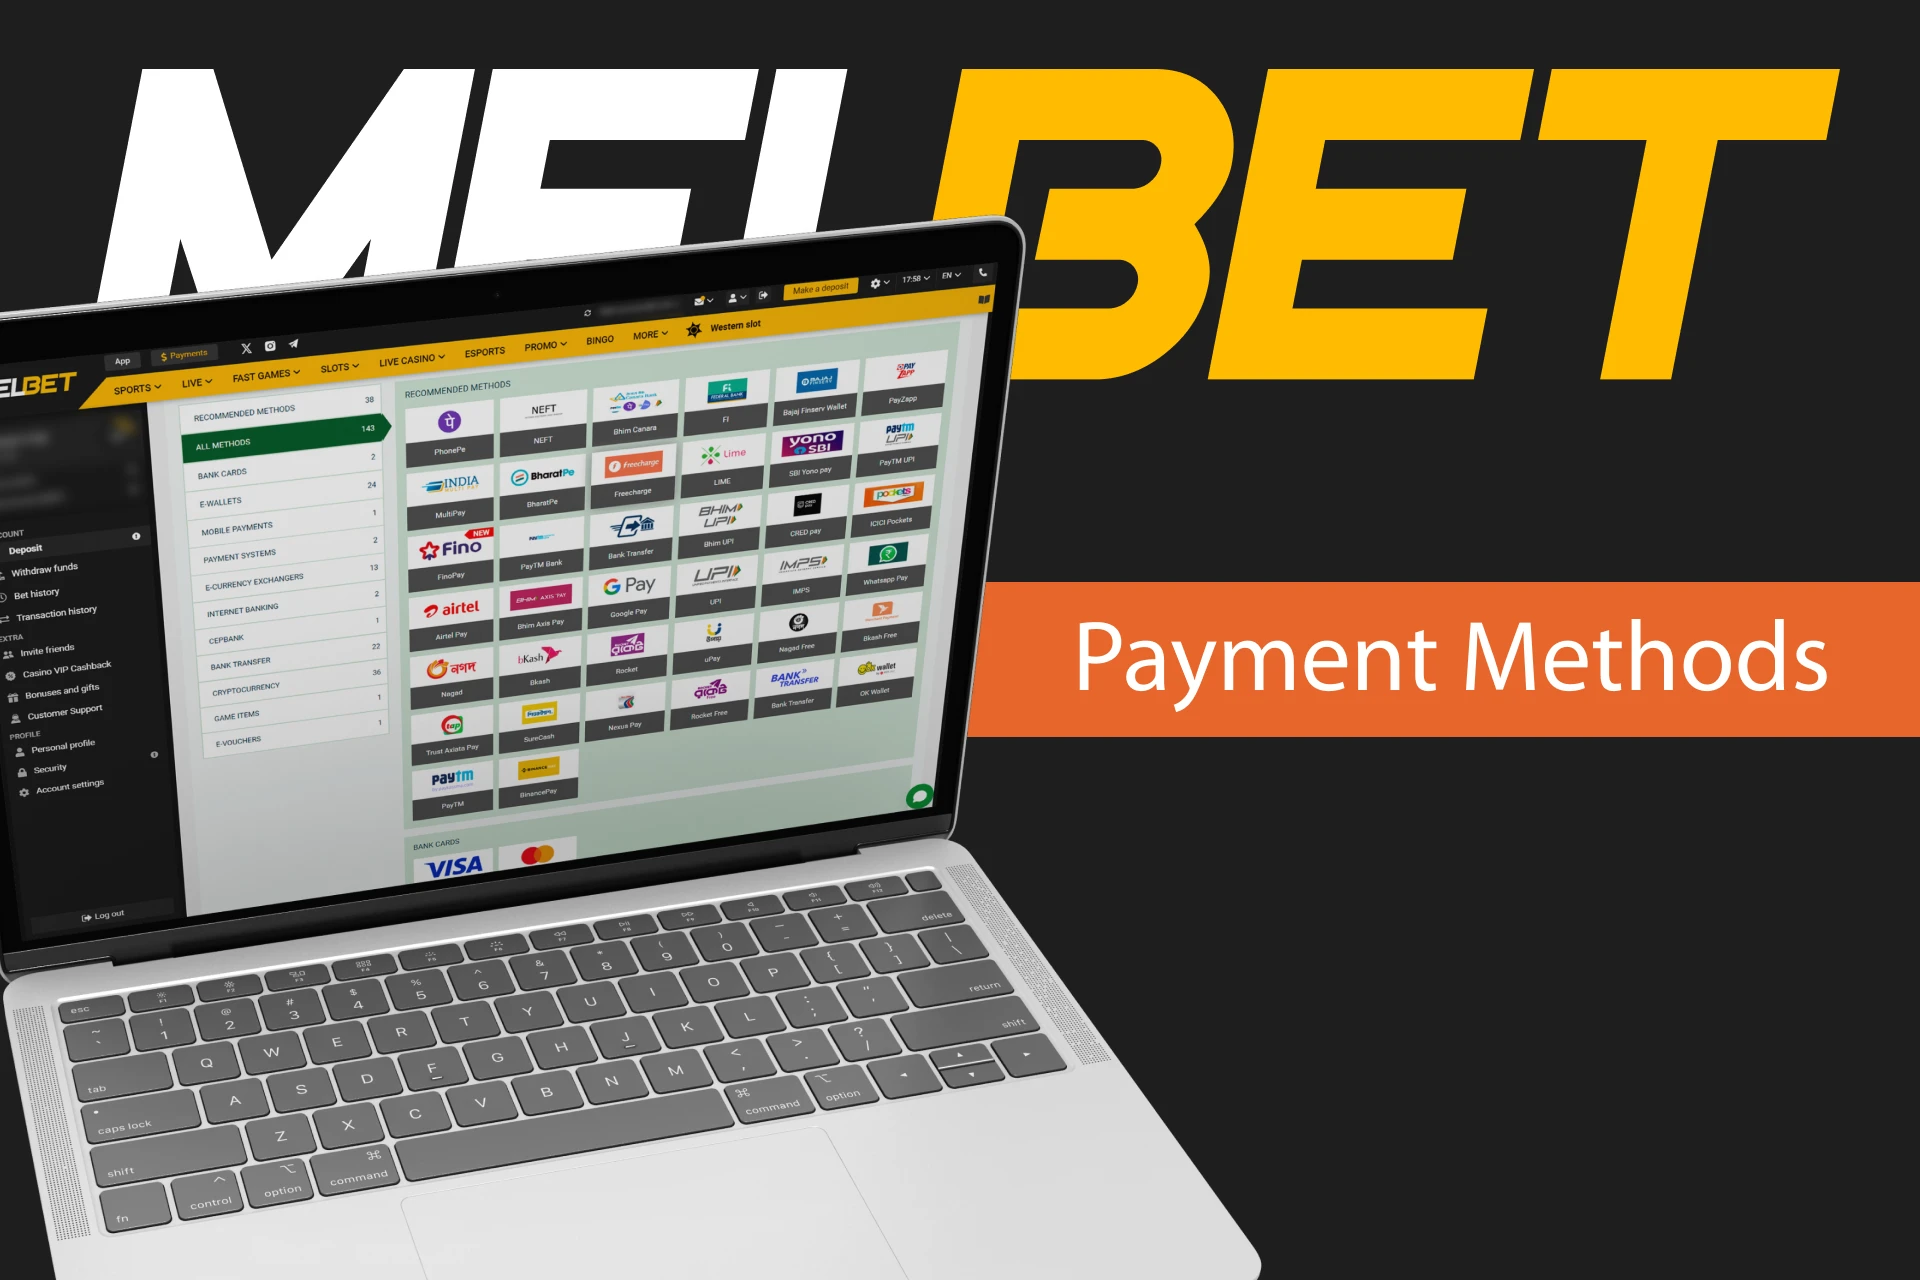 Melbet has many popular payment methods available for Bangladeshi players.